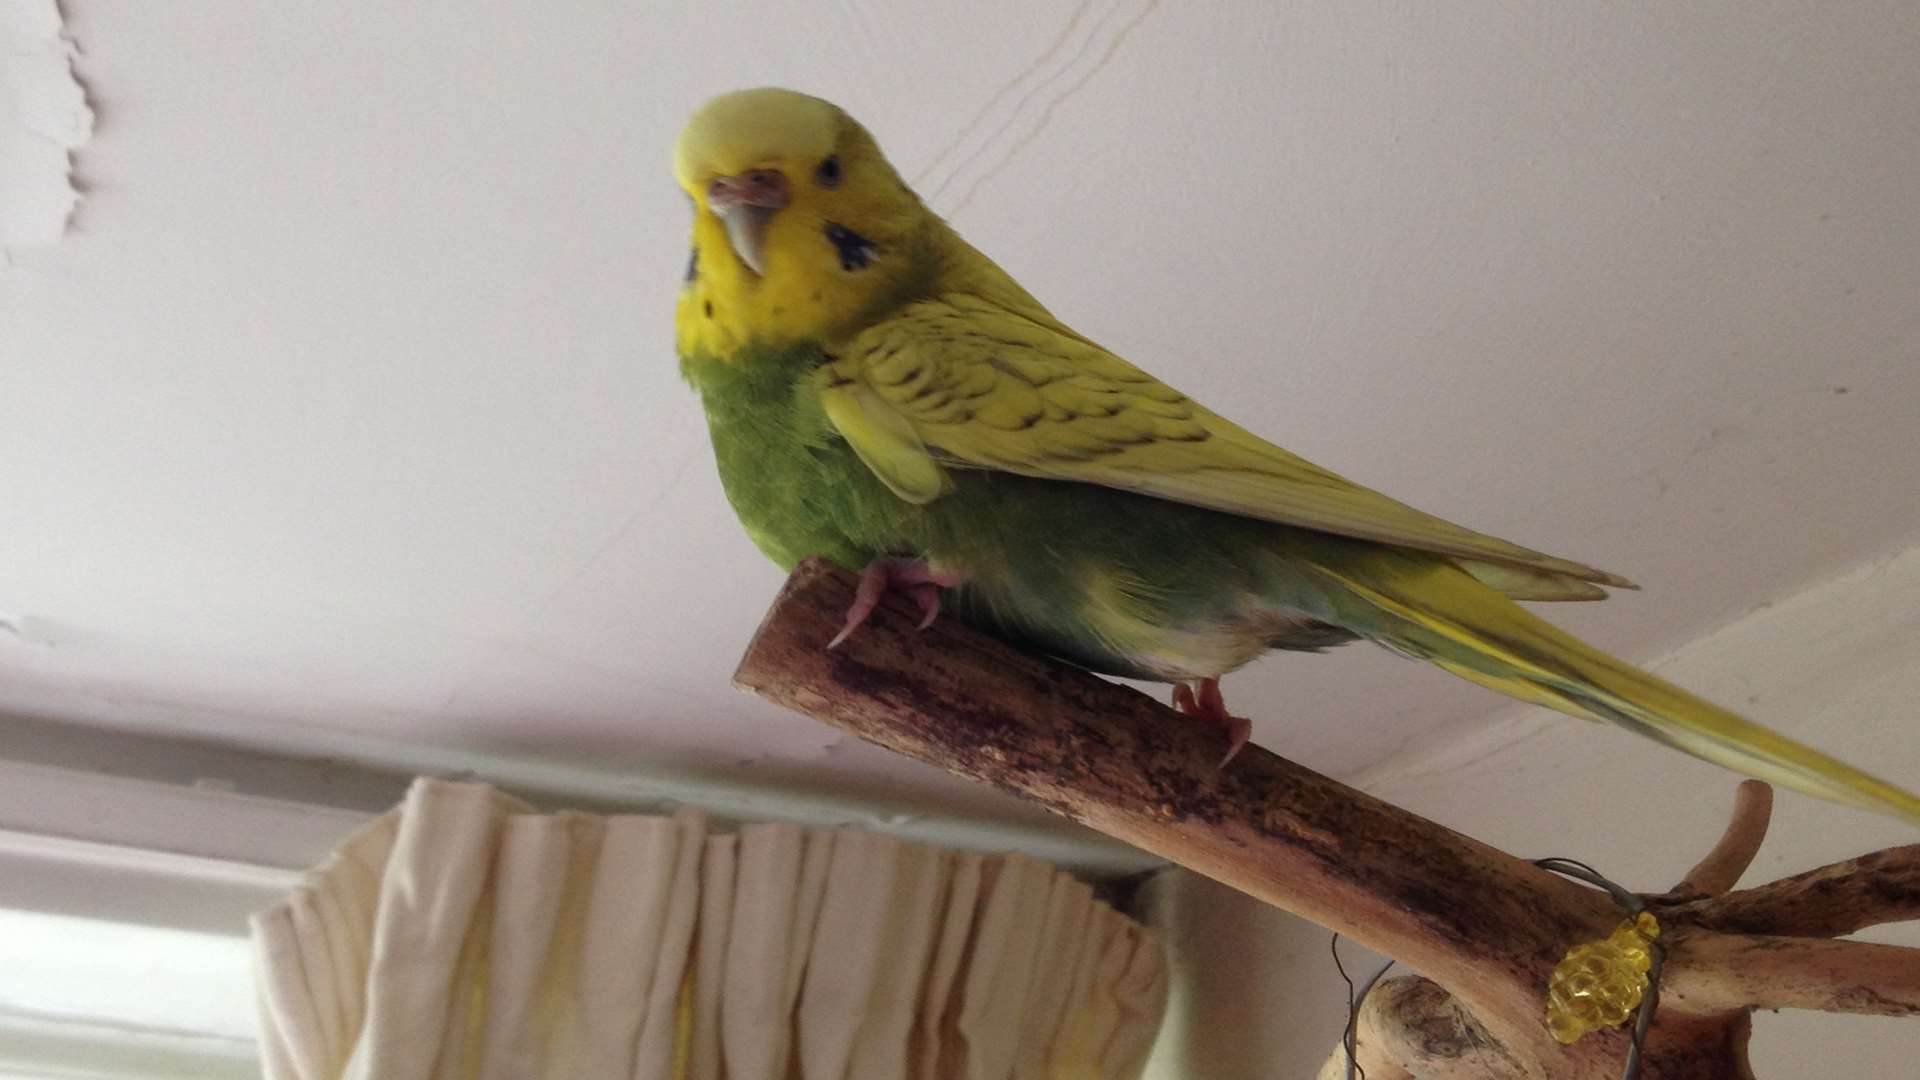 Molly the budgie has gone missing